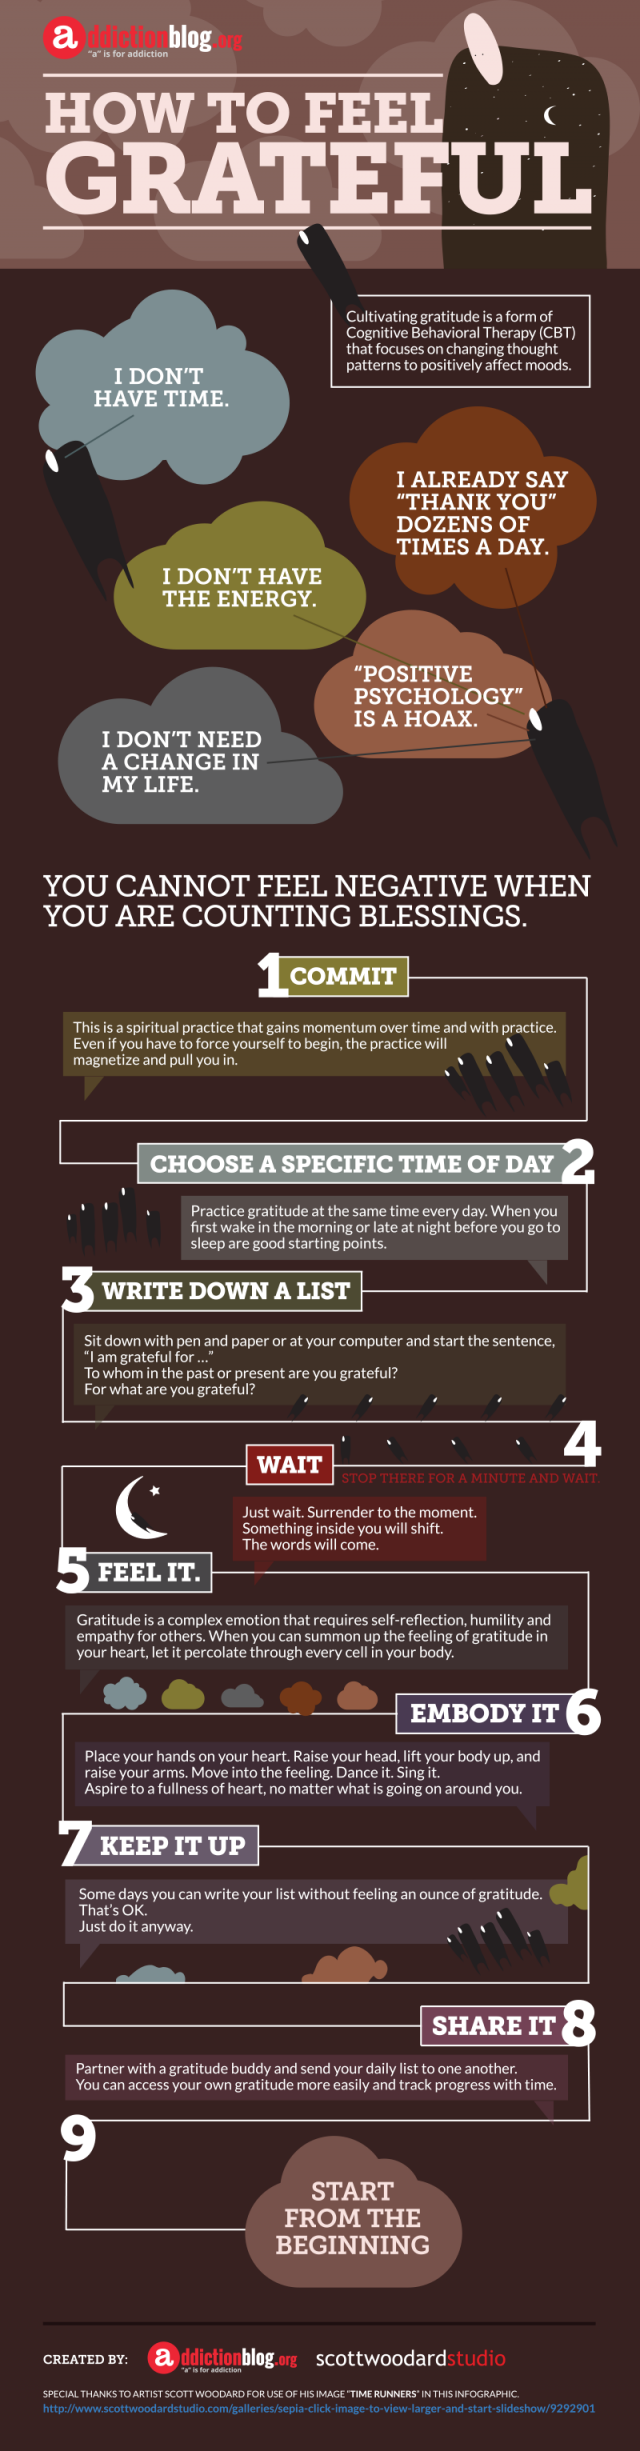 How to feel more grateful (INFOGRAPHIC)